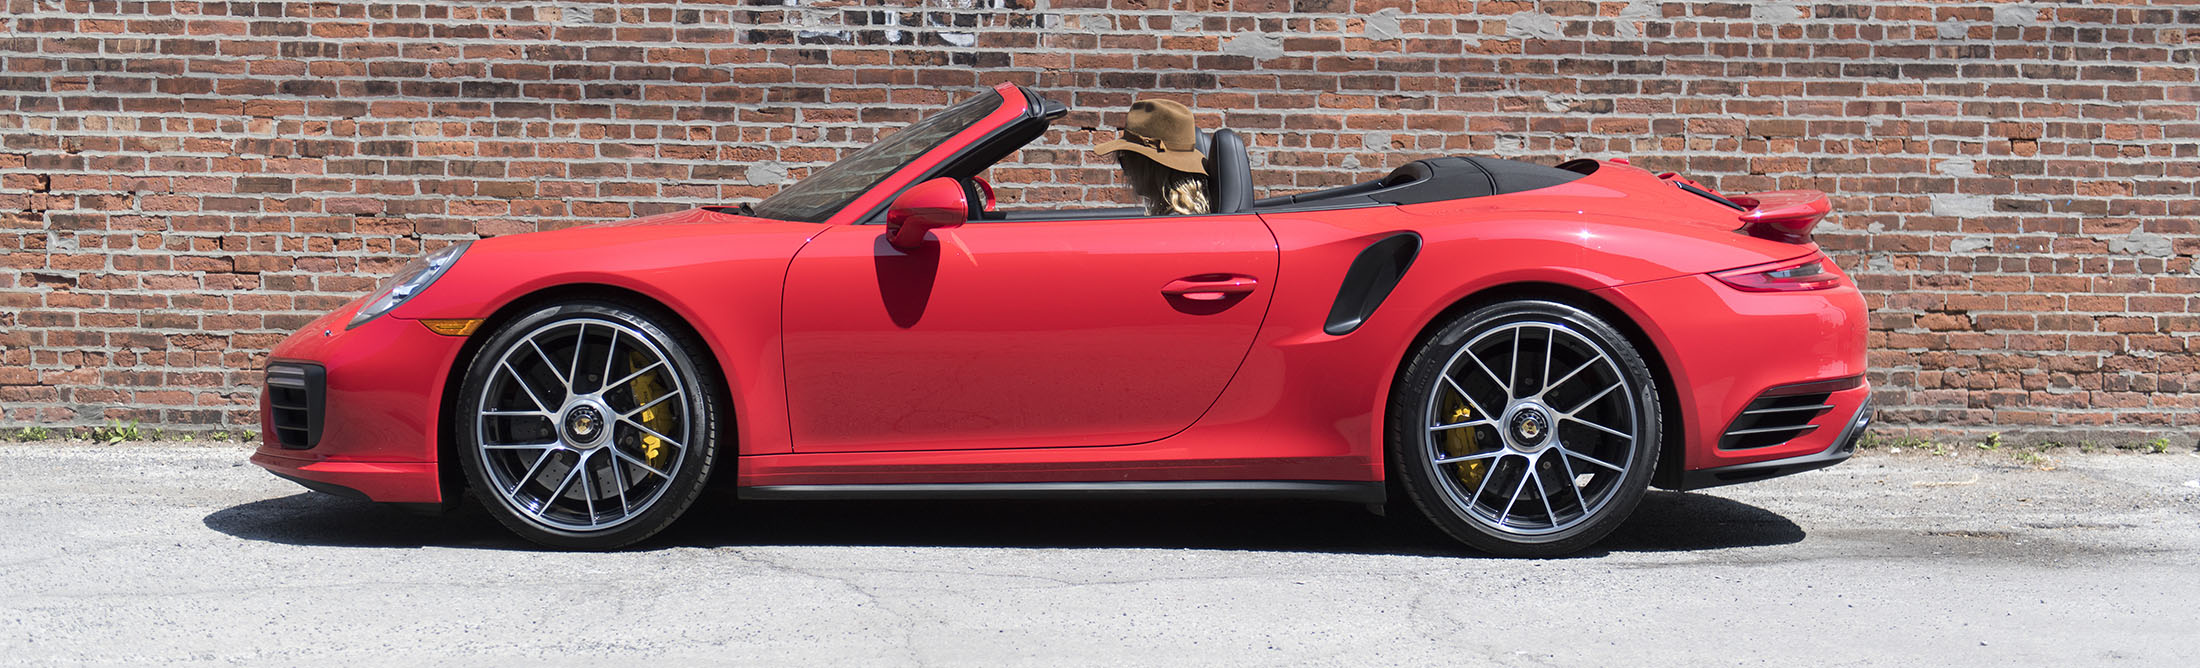 Porsche 911 Turbo S Cabriolet Review: The Best Car for Summer - Bloomberg